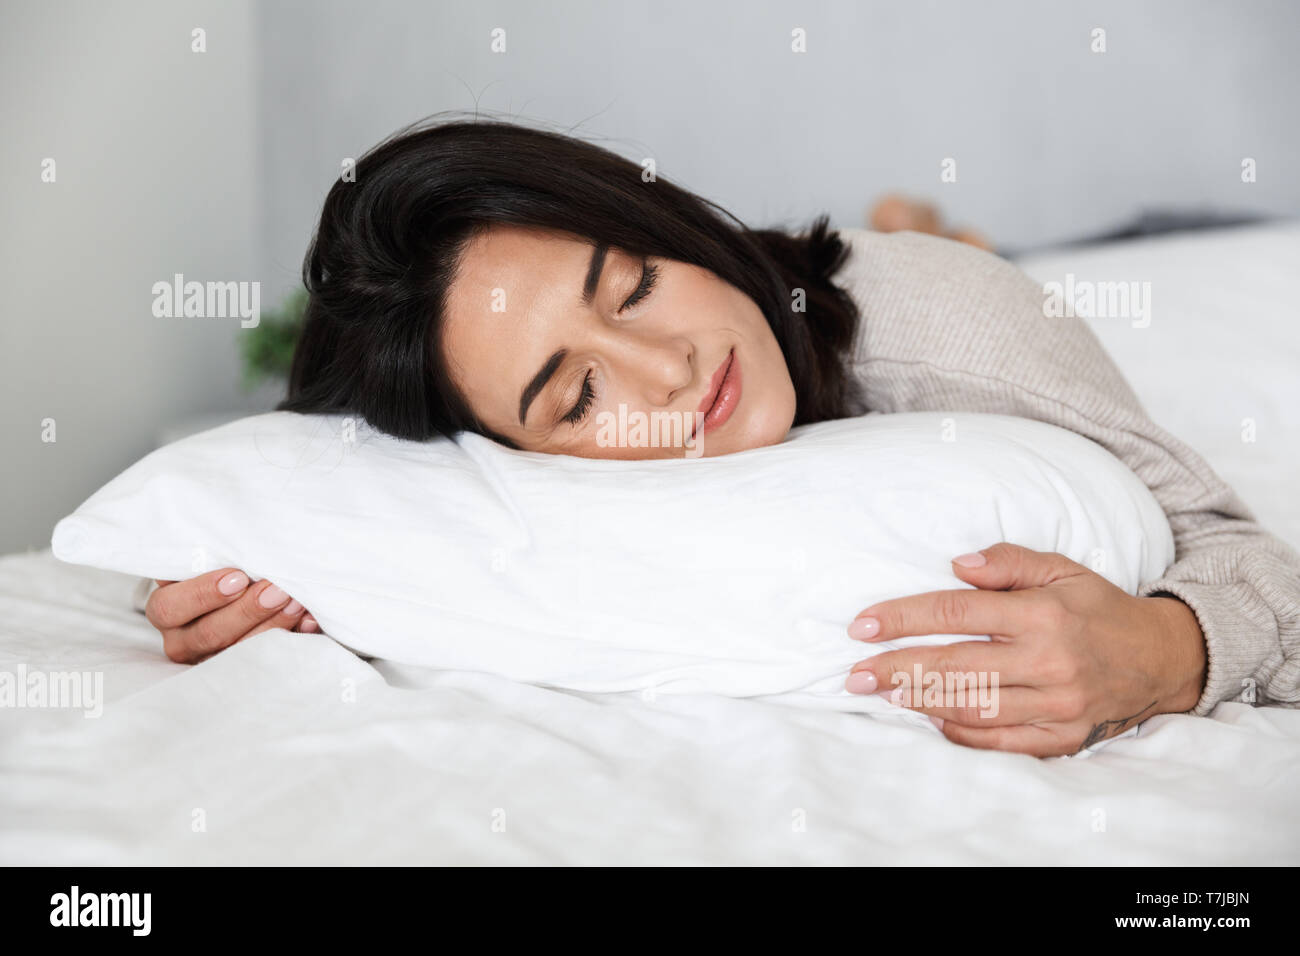 Photo of adult woman 30s sleeping while lying in bed with white linen at home Stock Photo